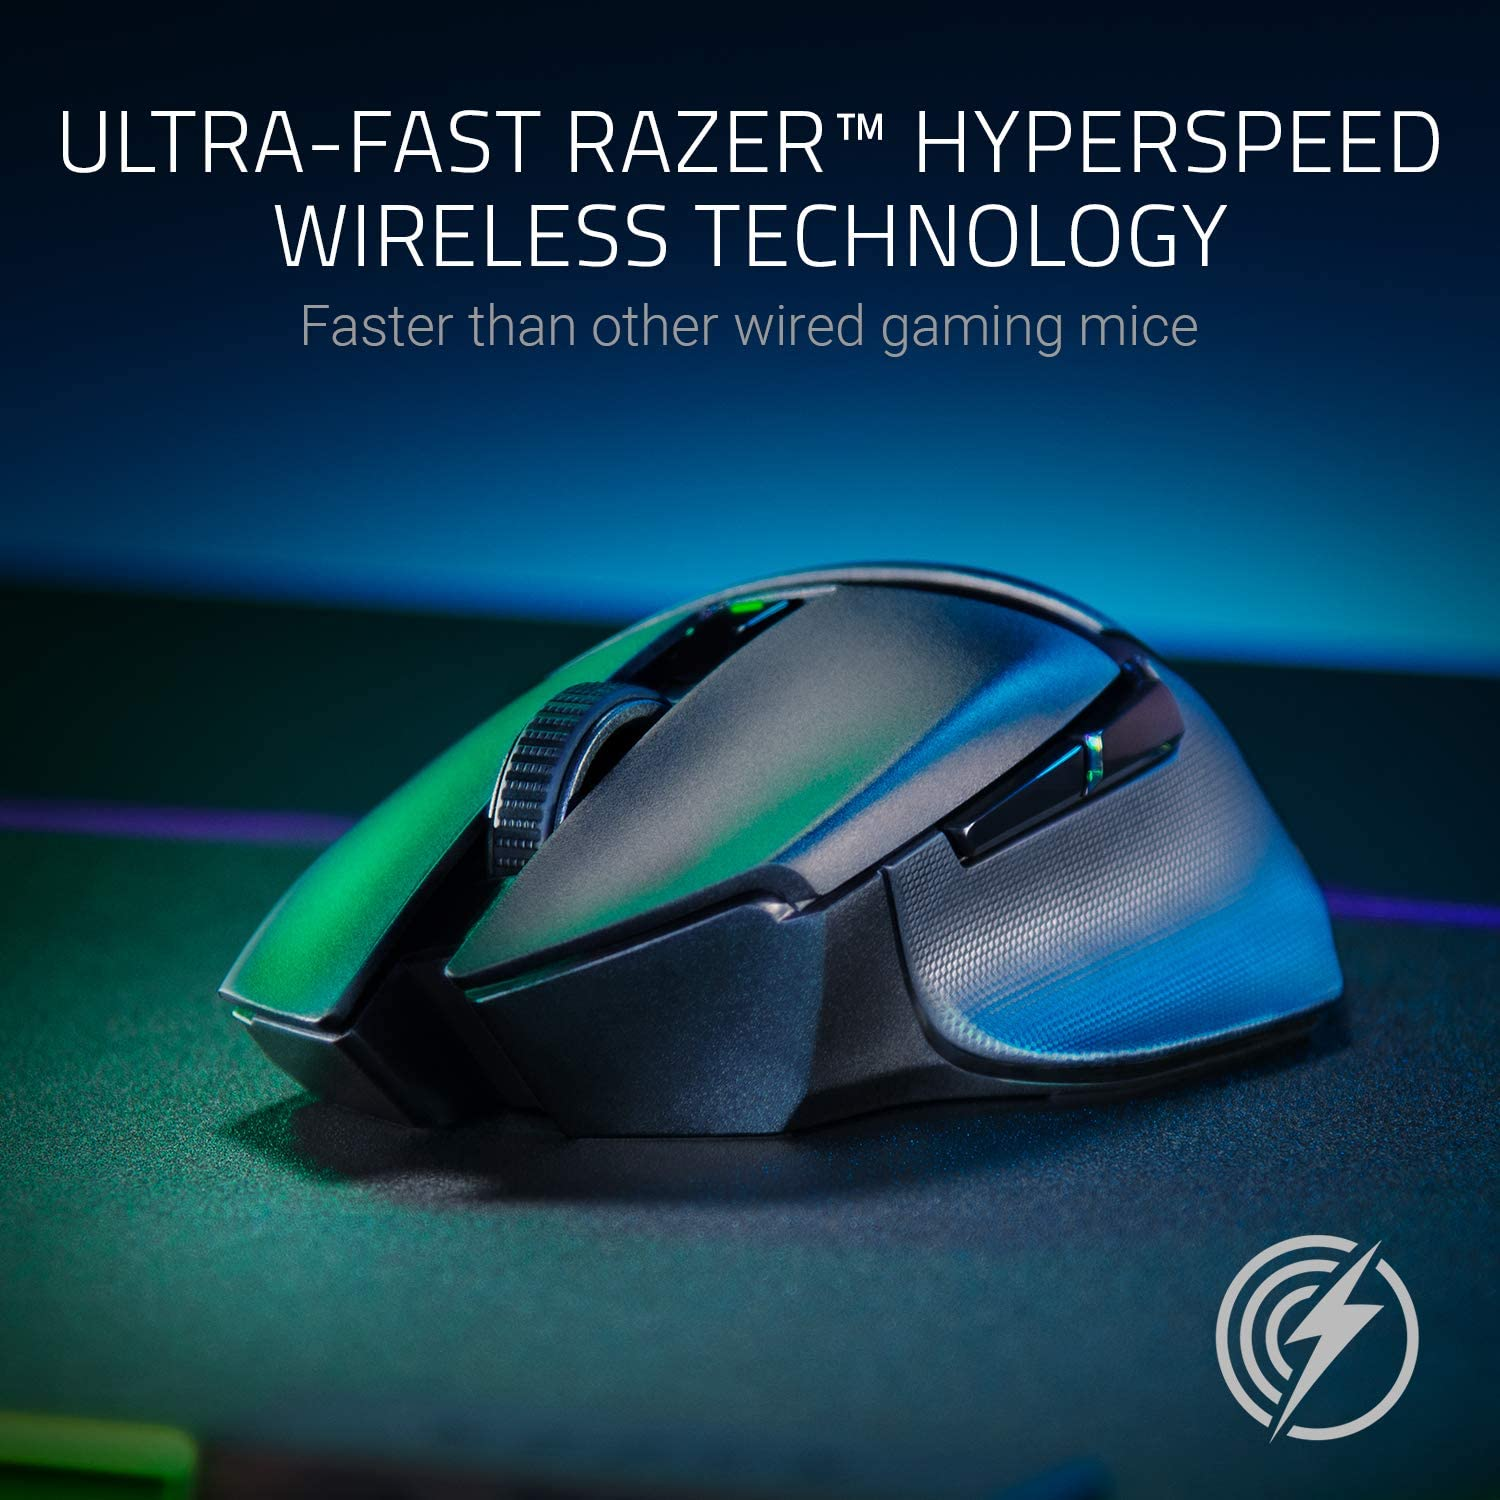 Cheap gaming mouse options may not have a wireless connection like mice that have more advanced technology for better performance without a cable connection.